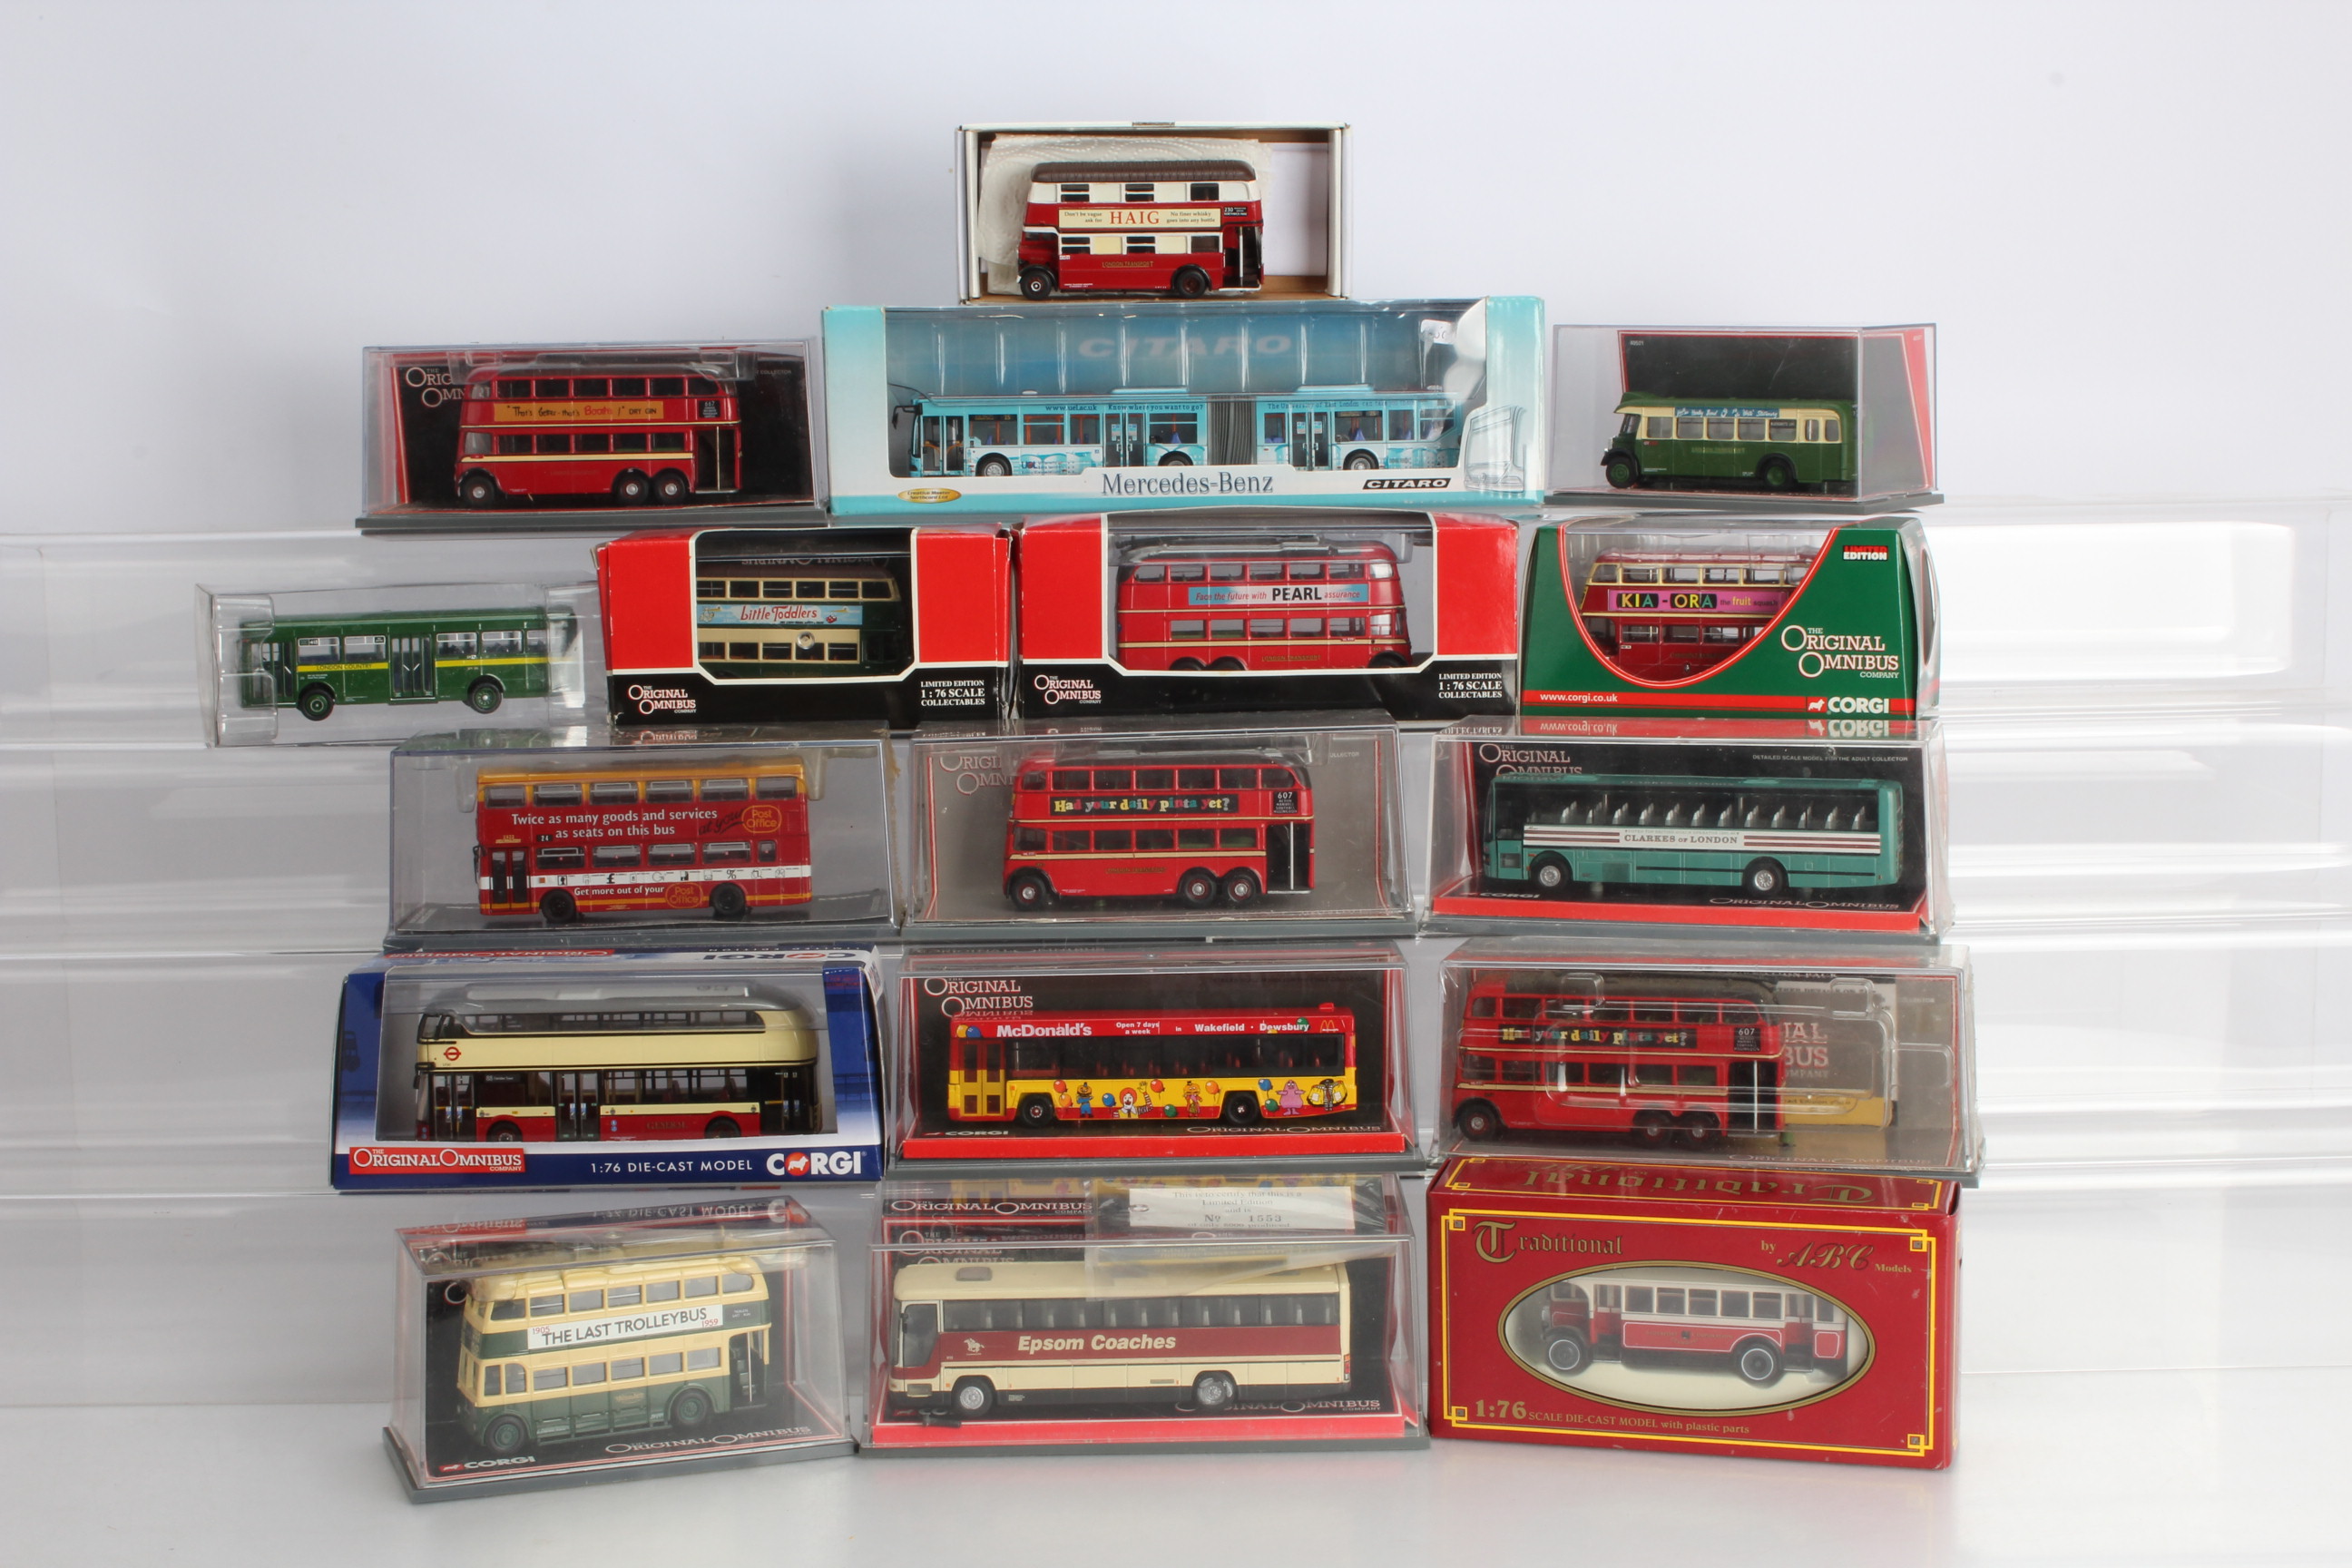 1:76 Scale Vintage and Modern Buses, all boxed/cased, single deck models, Britbus AS2-01 AEC Swift